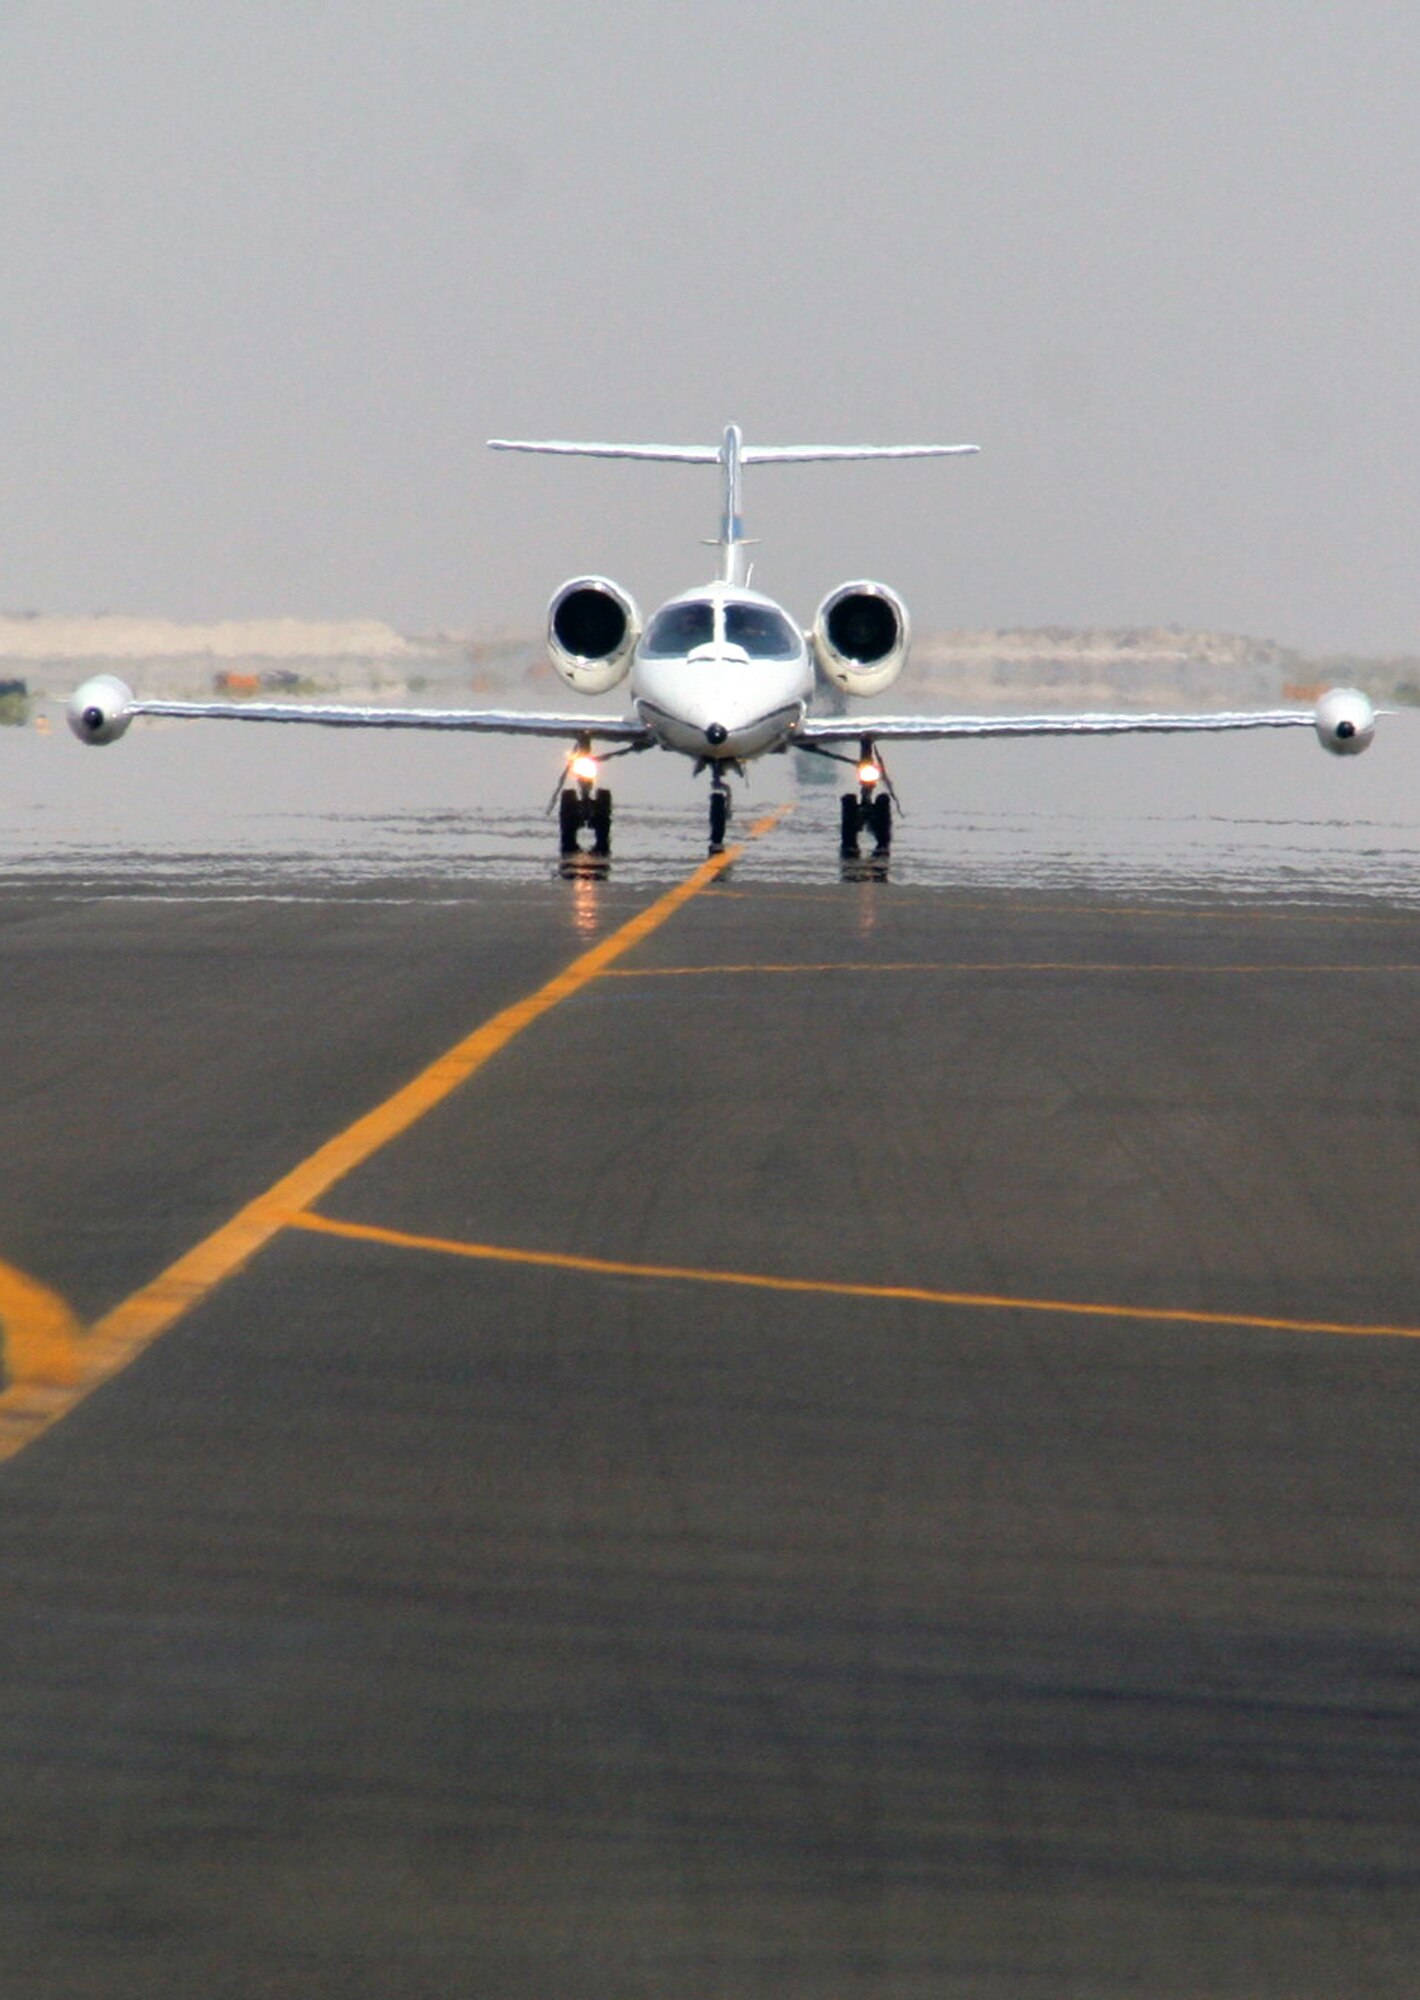 A C-21 passenger jet taxis on the runway to the flightline of the 380th Air Expeditionary Wing at a non-disclosed location in Southwest Asia on May 19. The C-21, according to its Air Force fact sheet, is a twin turbofan engine aircraft used for cargo and passenger airlift. The aircraft is the military version of the Lear Jet 35A business jet. In addition to providing cargo and passenger airlift, the aircraft is capable of transporting one litter or five ambulatory patients during aeromedical evacuations. The C-21 can carry eight passengers and 42 cubic feet (1.26 cubic meters) of cargo.